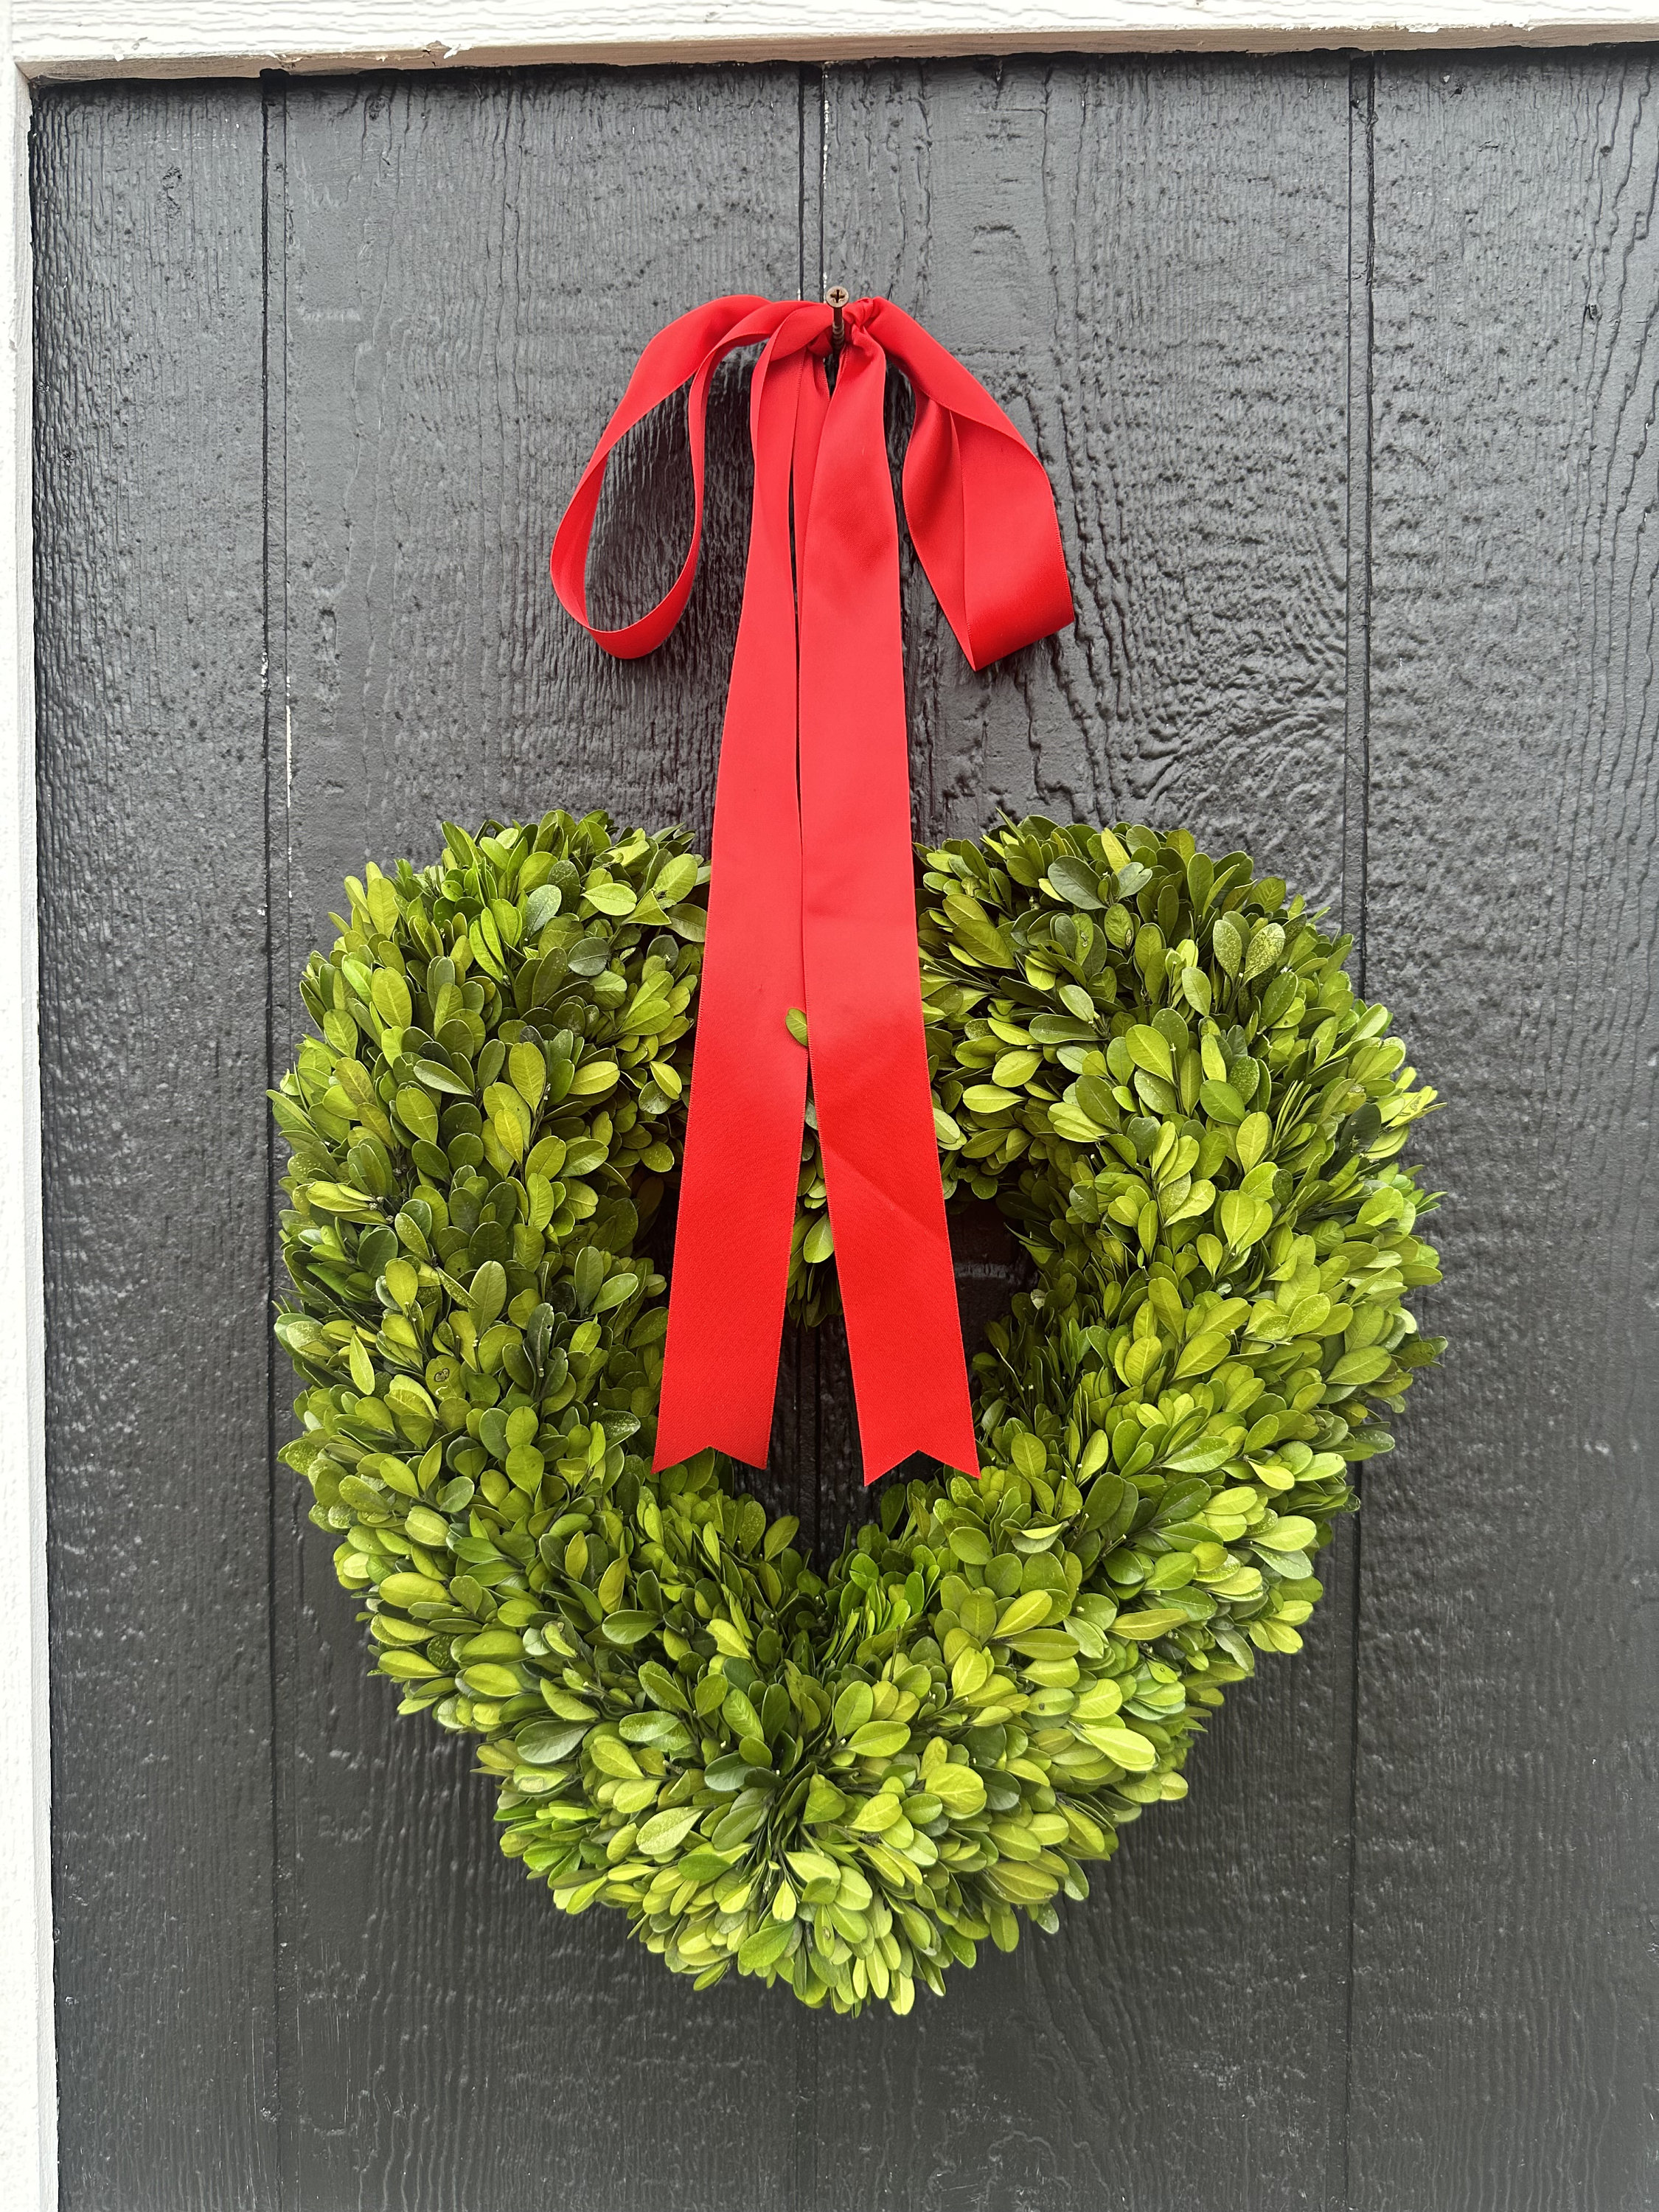 CHOOSE 6″, 8″ OR 10″ Small Mini Heart Shaped Preserved Boxwood